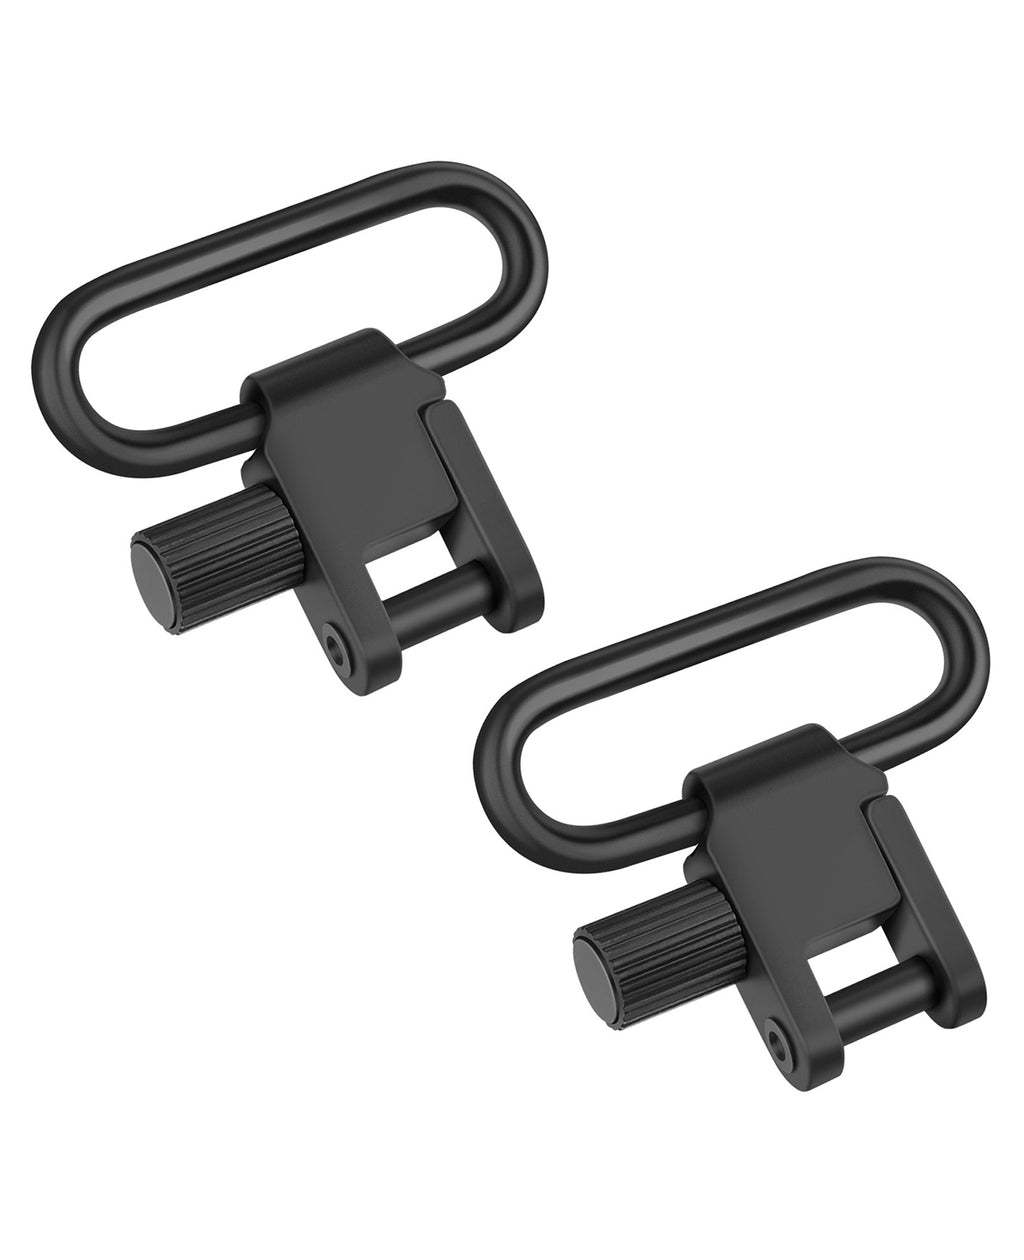 EZshoot 1-1.25 inches Sling Swivel Quick Attach/Release Sling Swivels